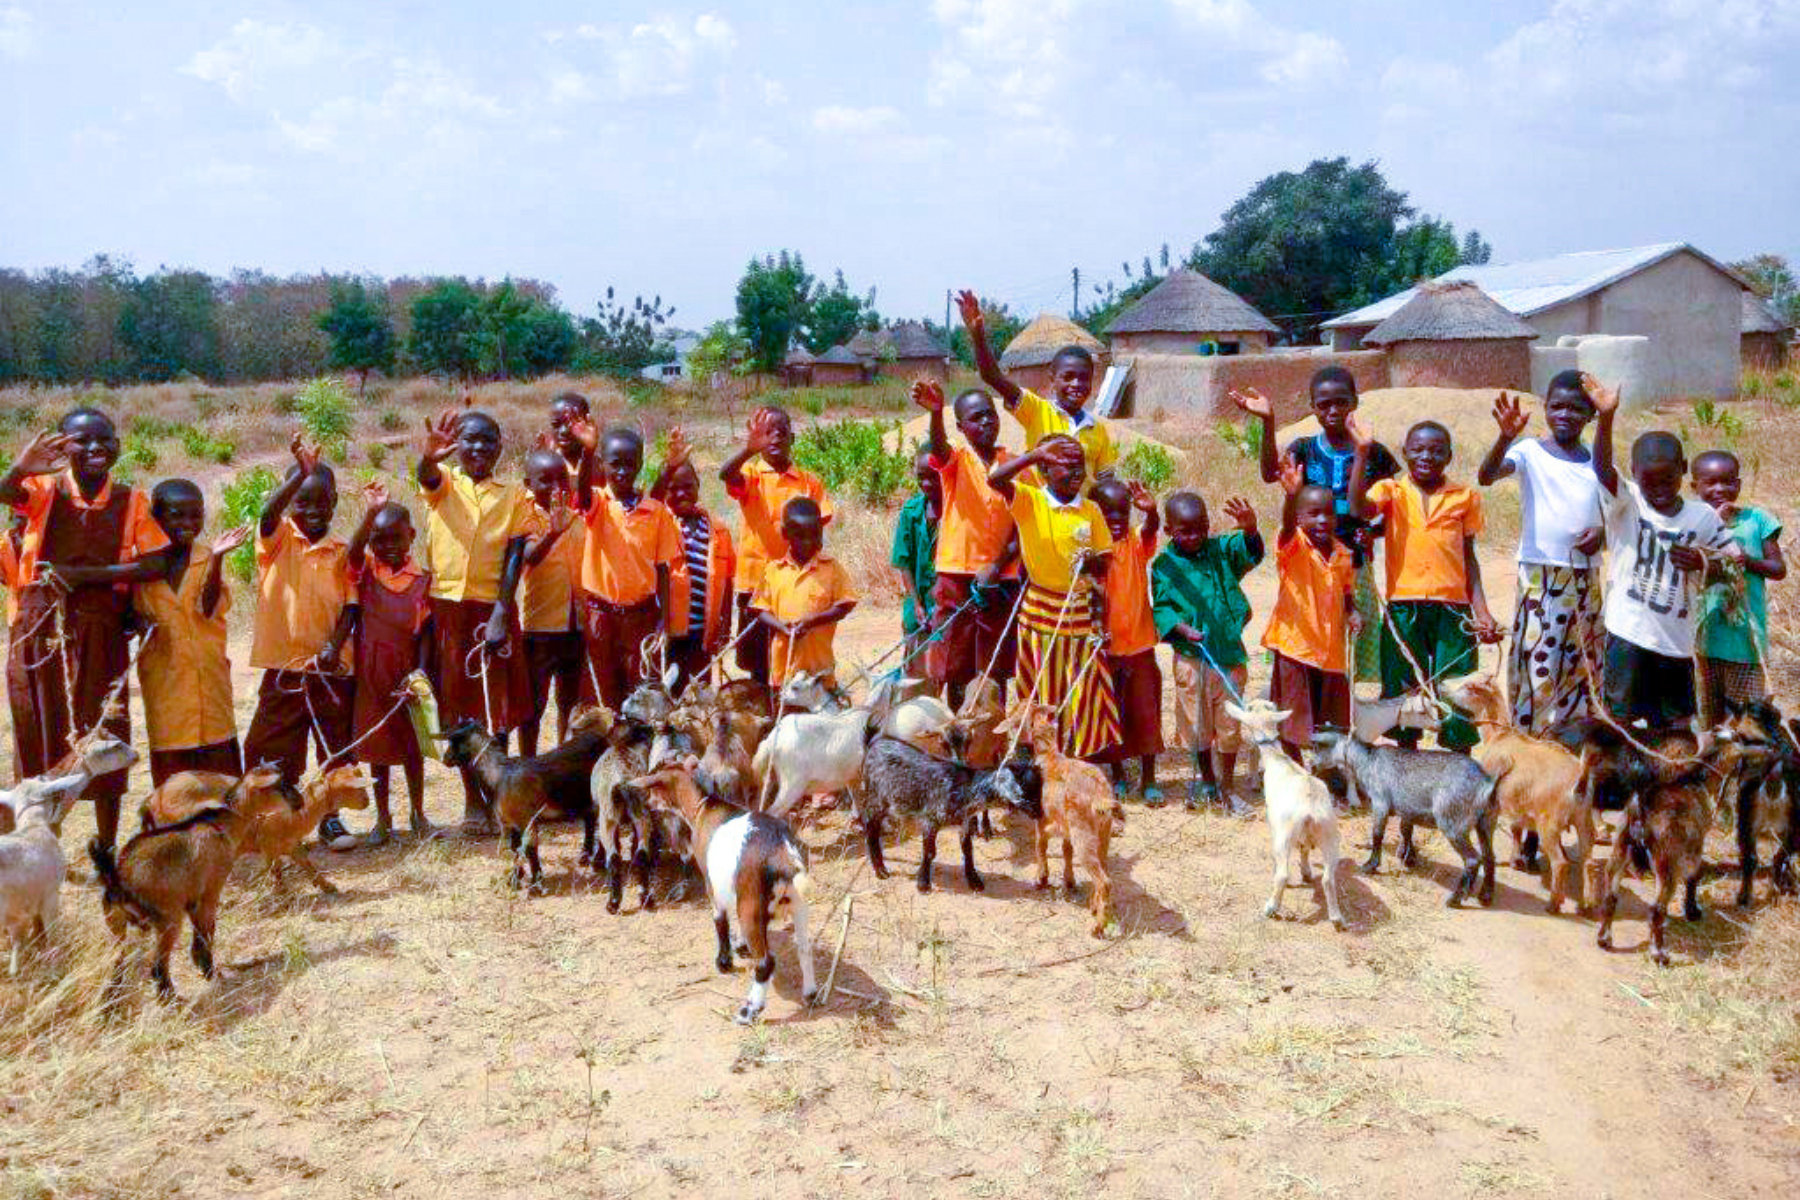   The Goat Project   Bringing help and hope to Africa’s children.    Learn more   